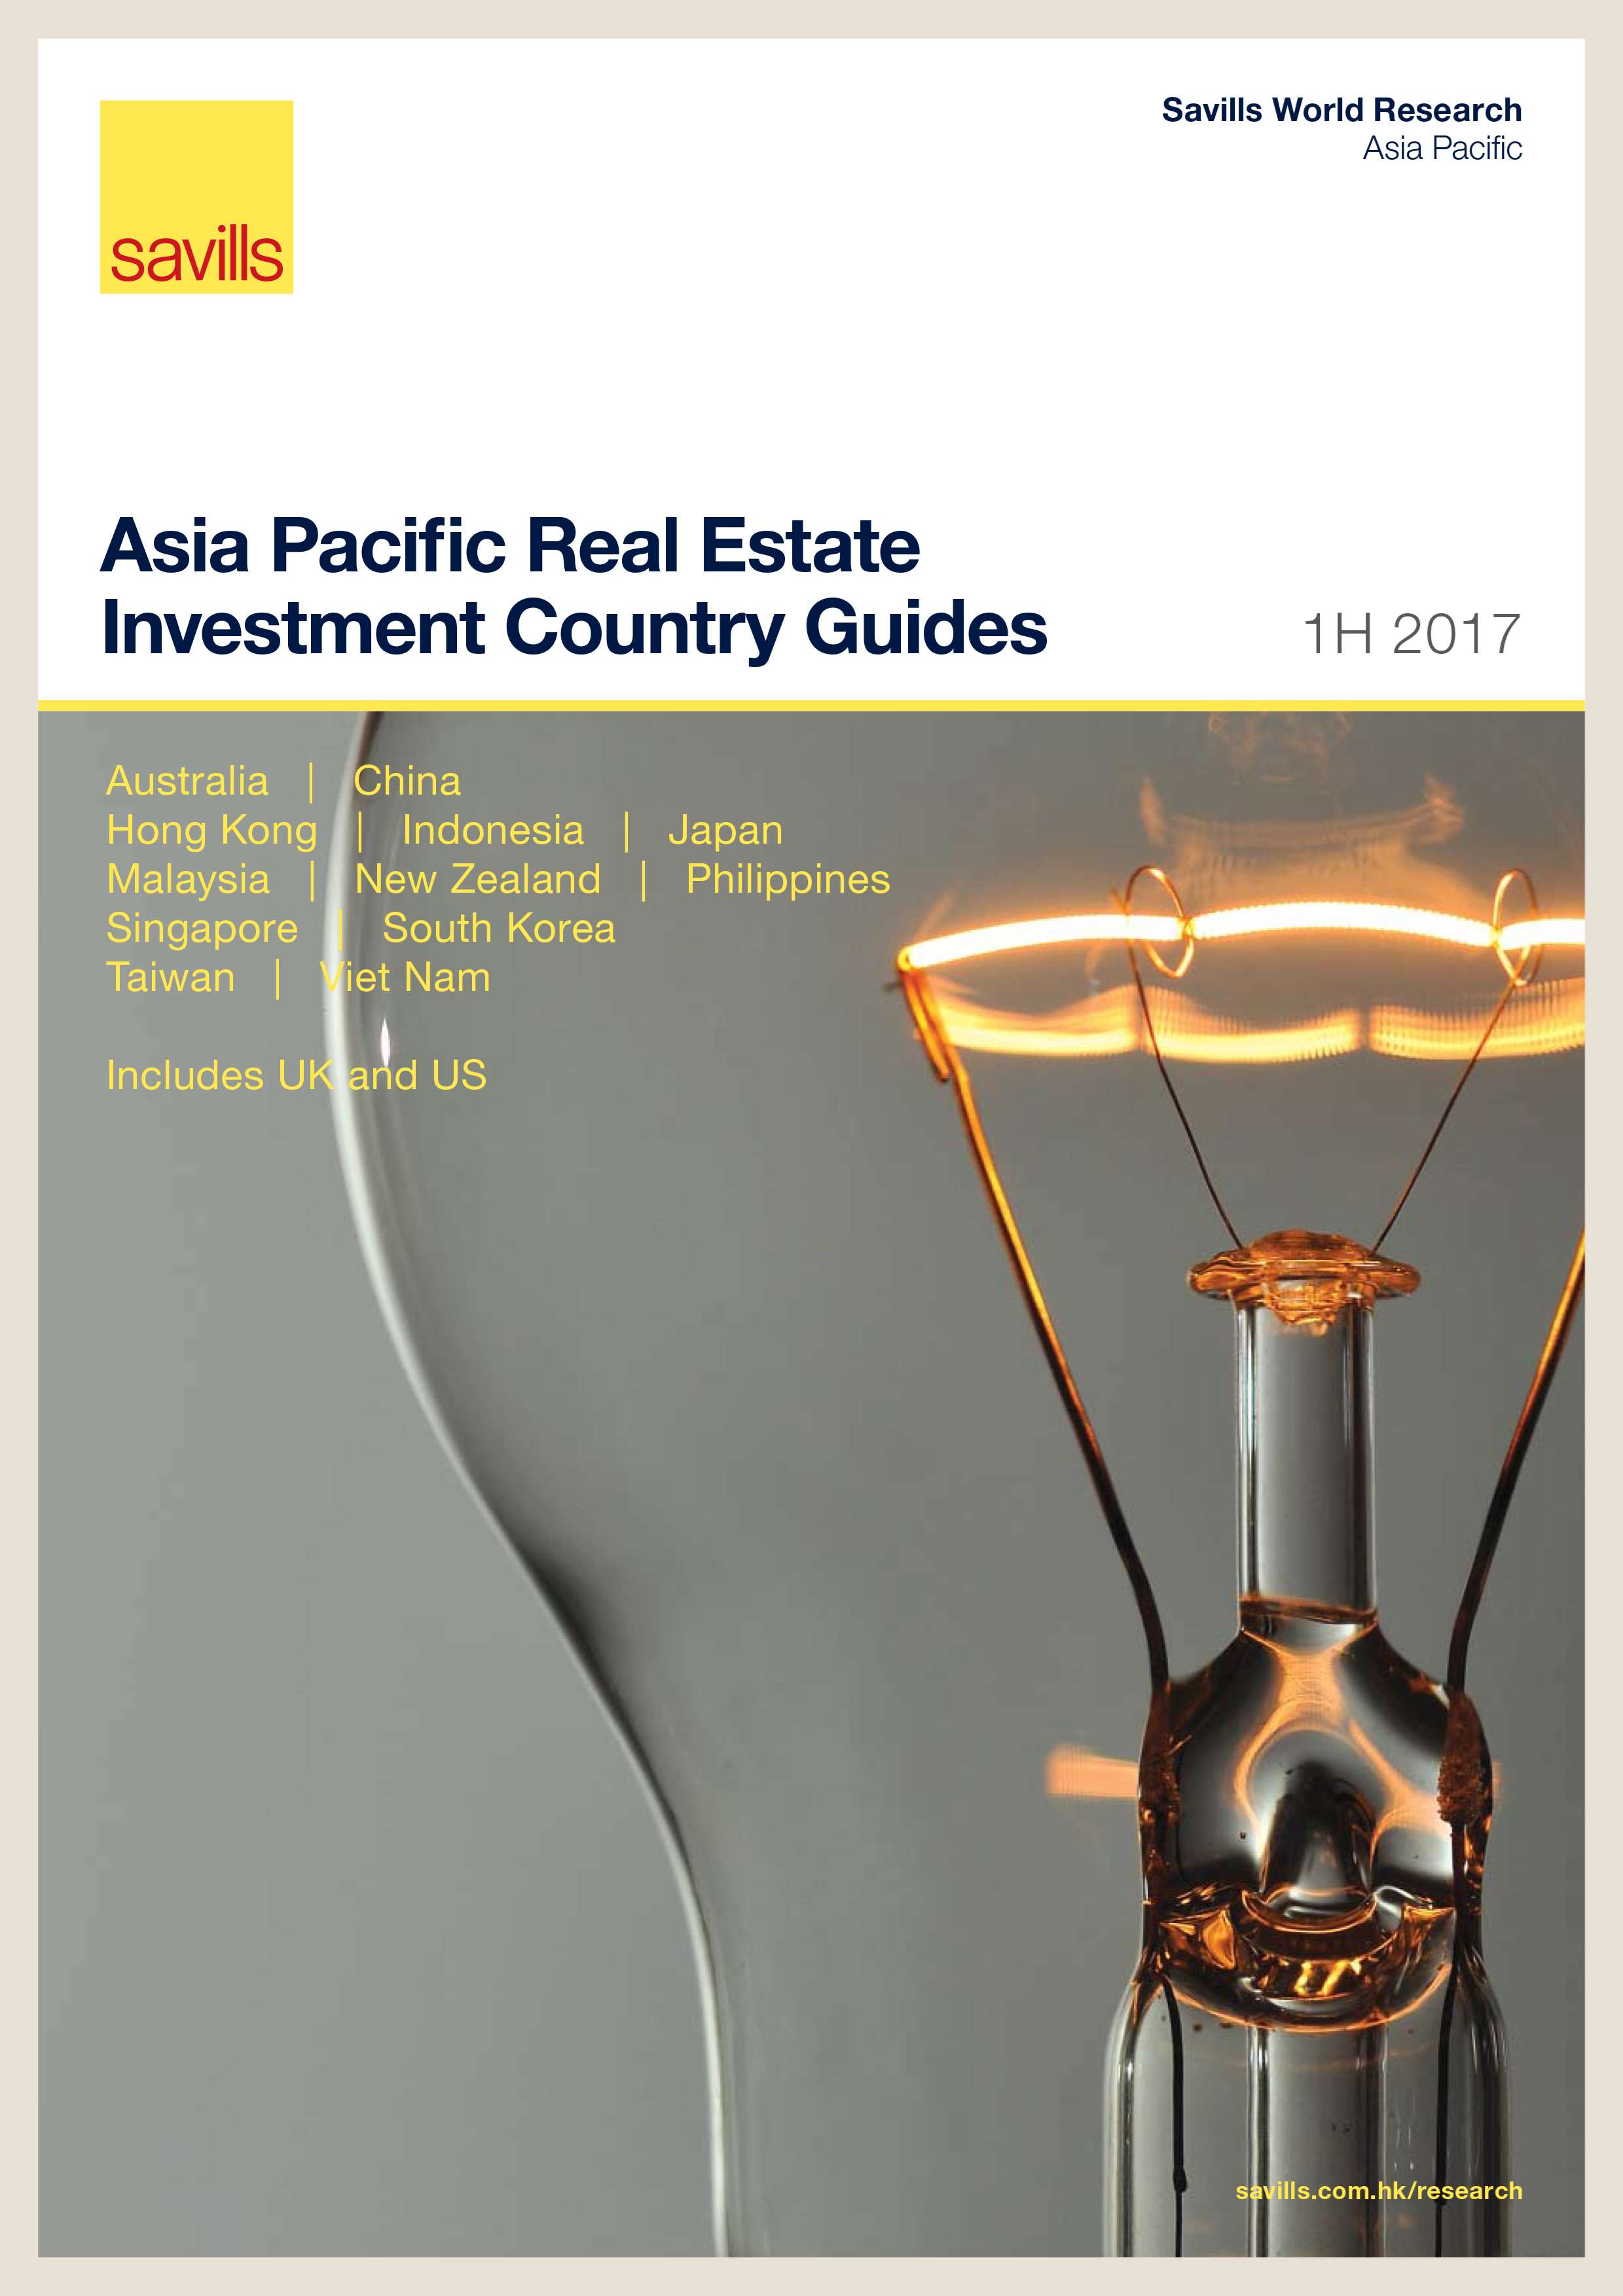 Asia Pacific Real Estate Investment Country Guide 1H 2017